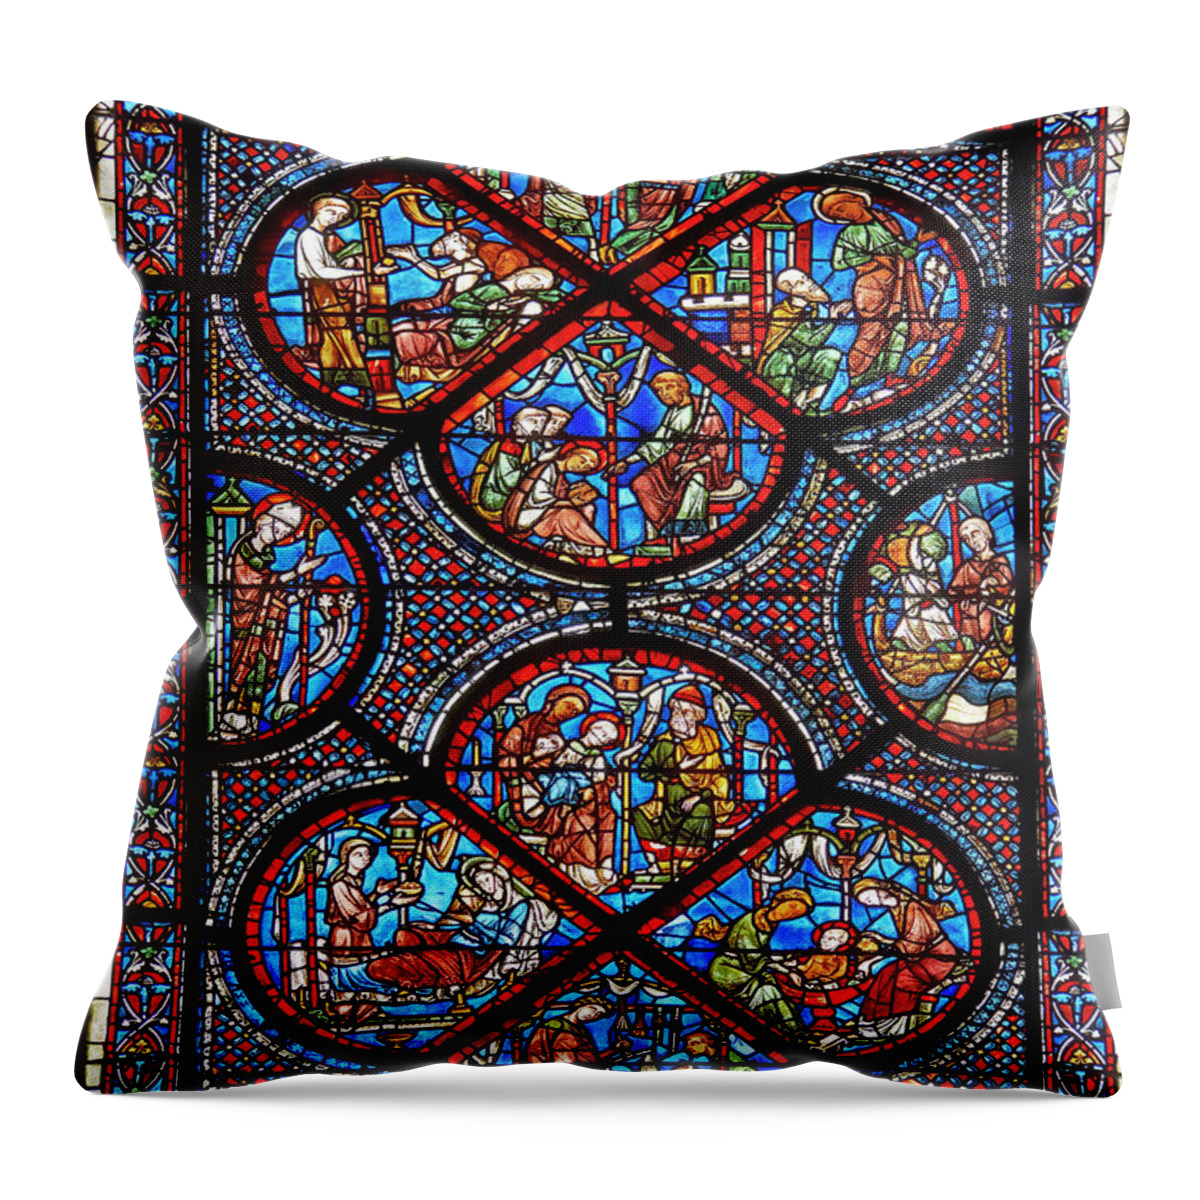 Chatre Throw Pillow featuring the glass art Medieval Windows Cathedral of Chartres dedicated to St Nicholas by Paul E Williams